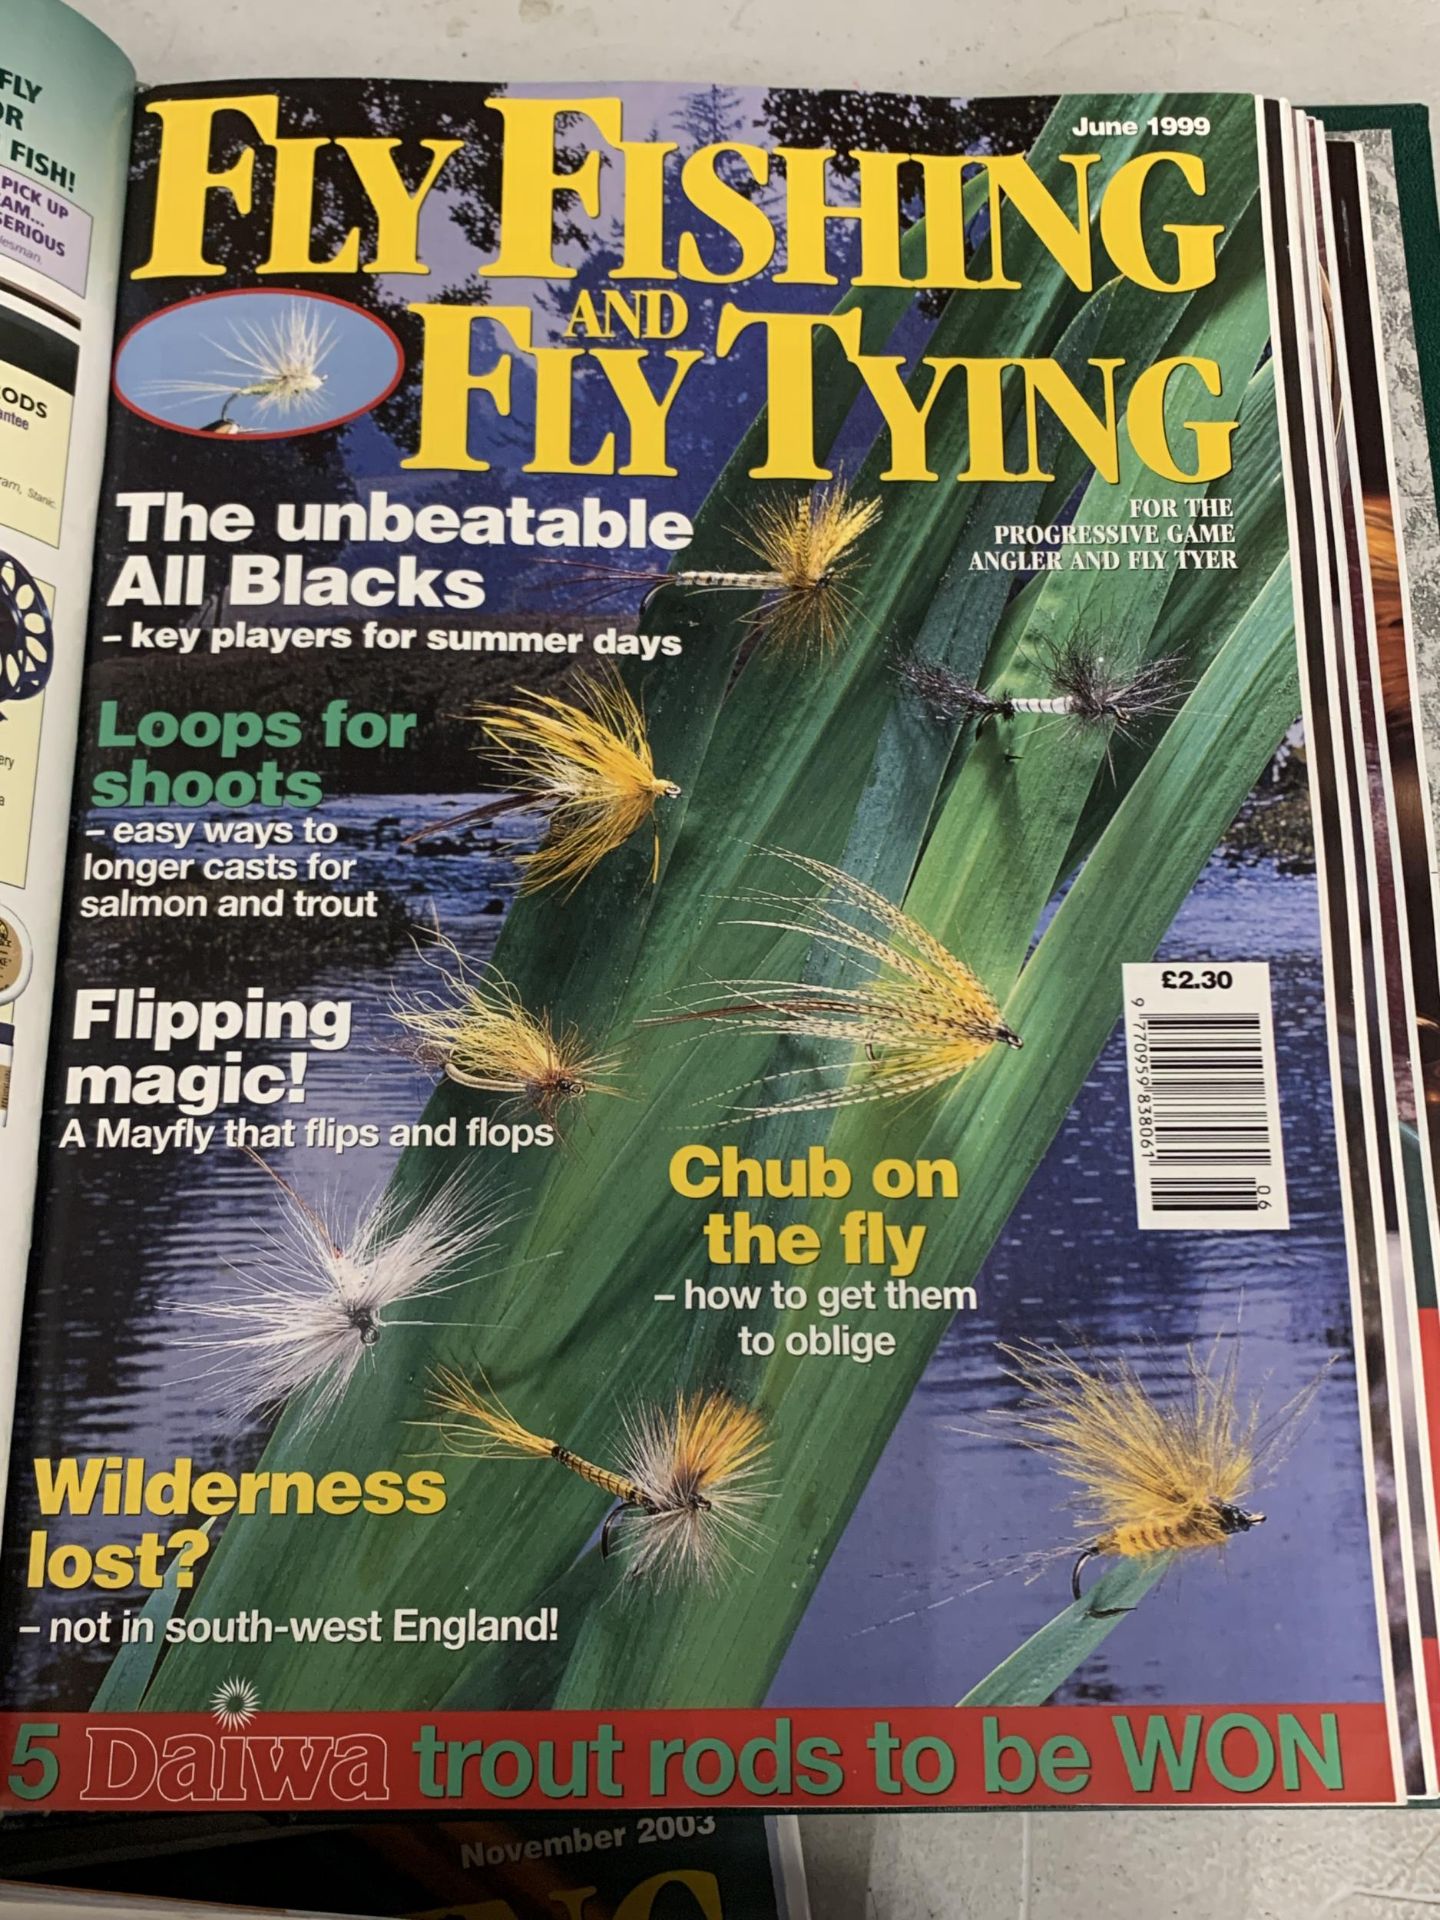 A LARGE COLLECTION OF FISHING MAGAZINES TO INCLUDE "TROUT FISHERMAN" AND "FLY FISHING AND FLY TYING" - Image 3 of 6